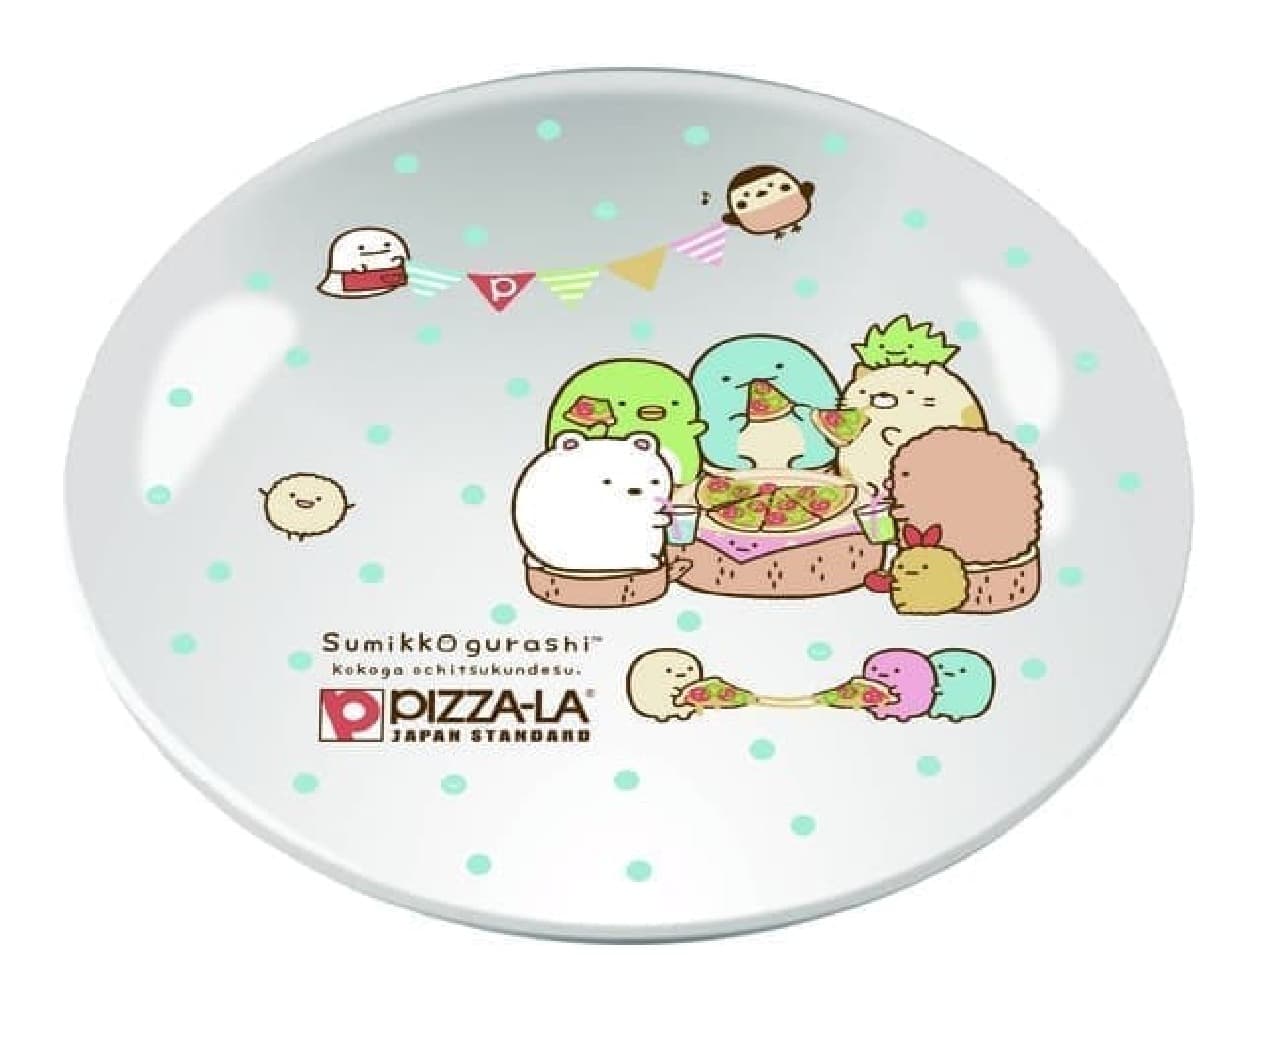 Limited quantity "Sumikko Gurashi Special Pack" from Pizza-La --You can get an original plate and sticker for an additional 200 yen